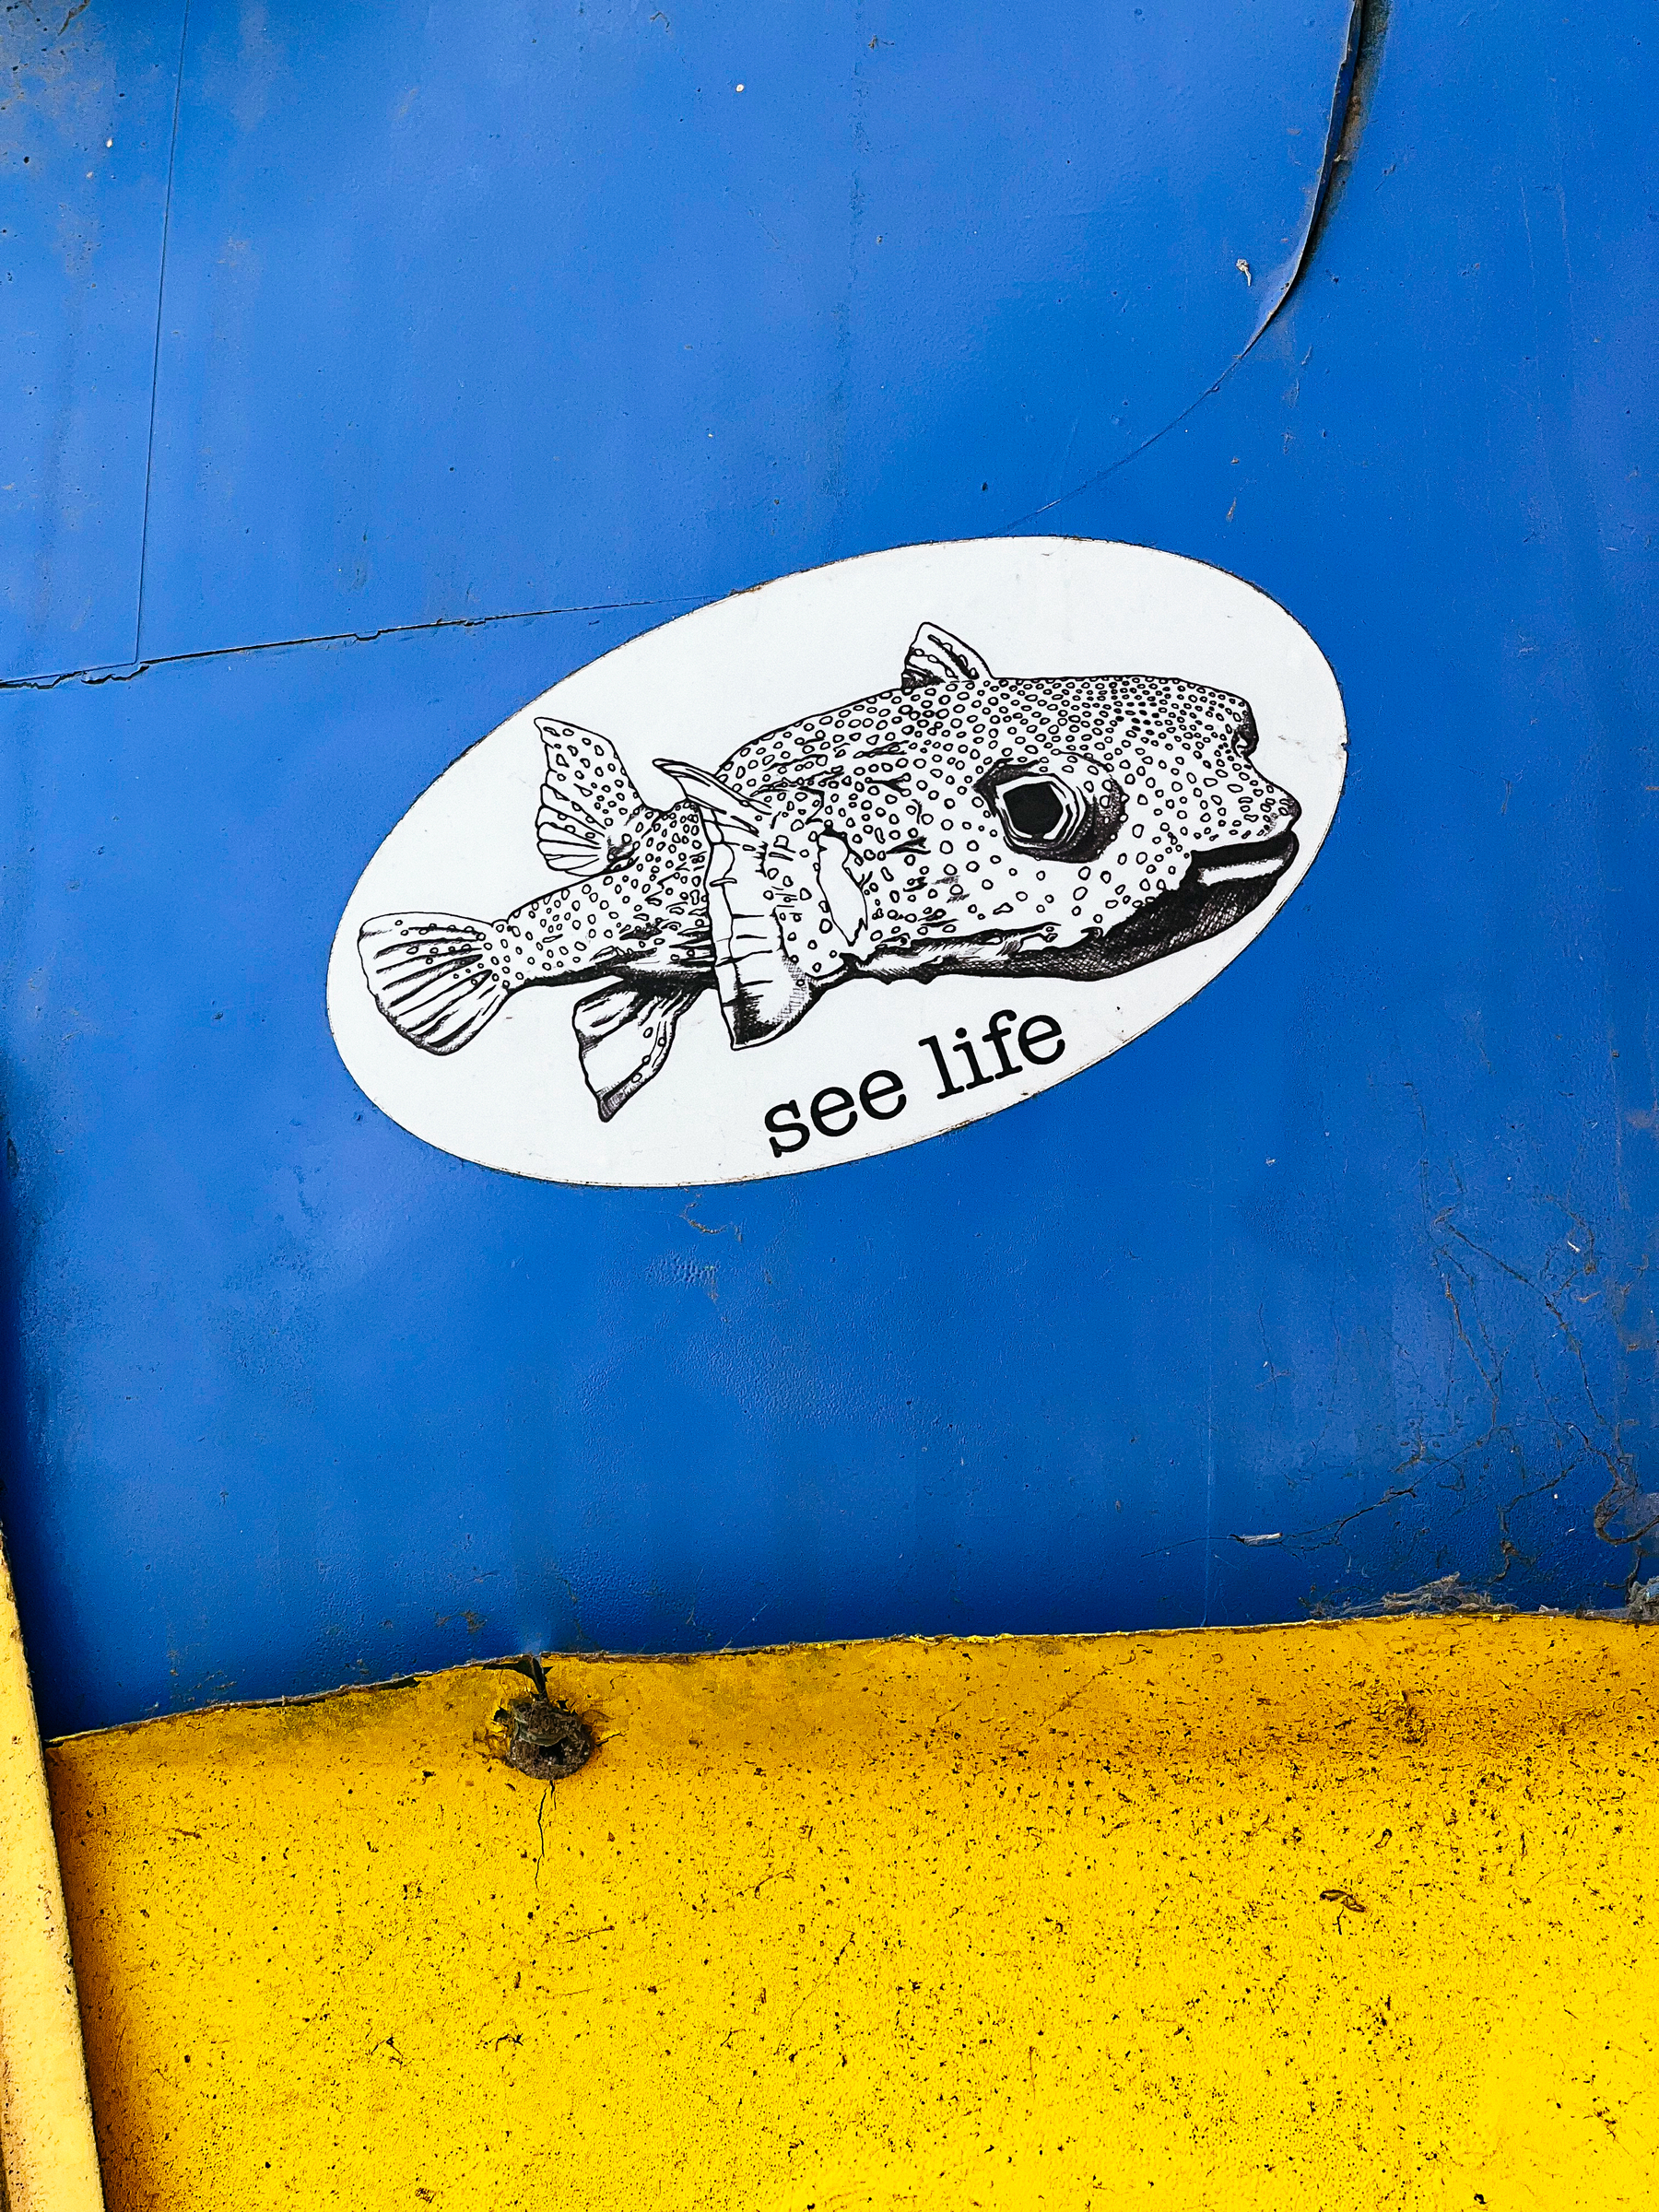 “See life”, and a drawing of a fish. On a sticker. 